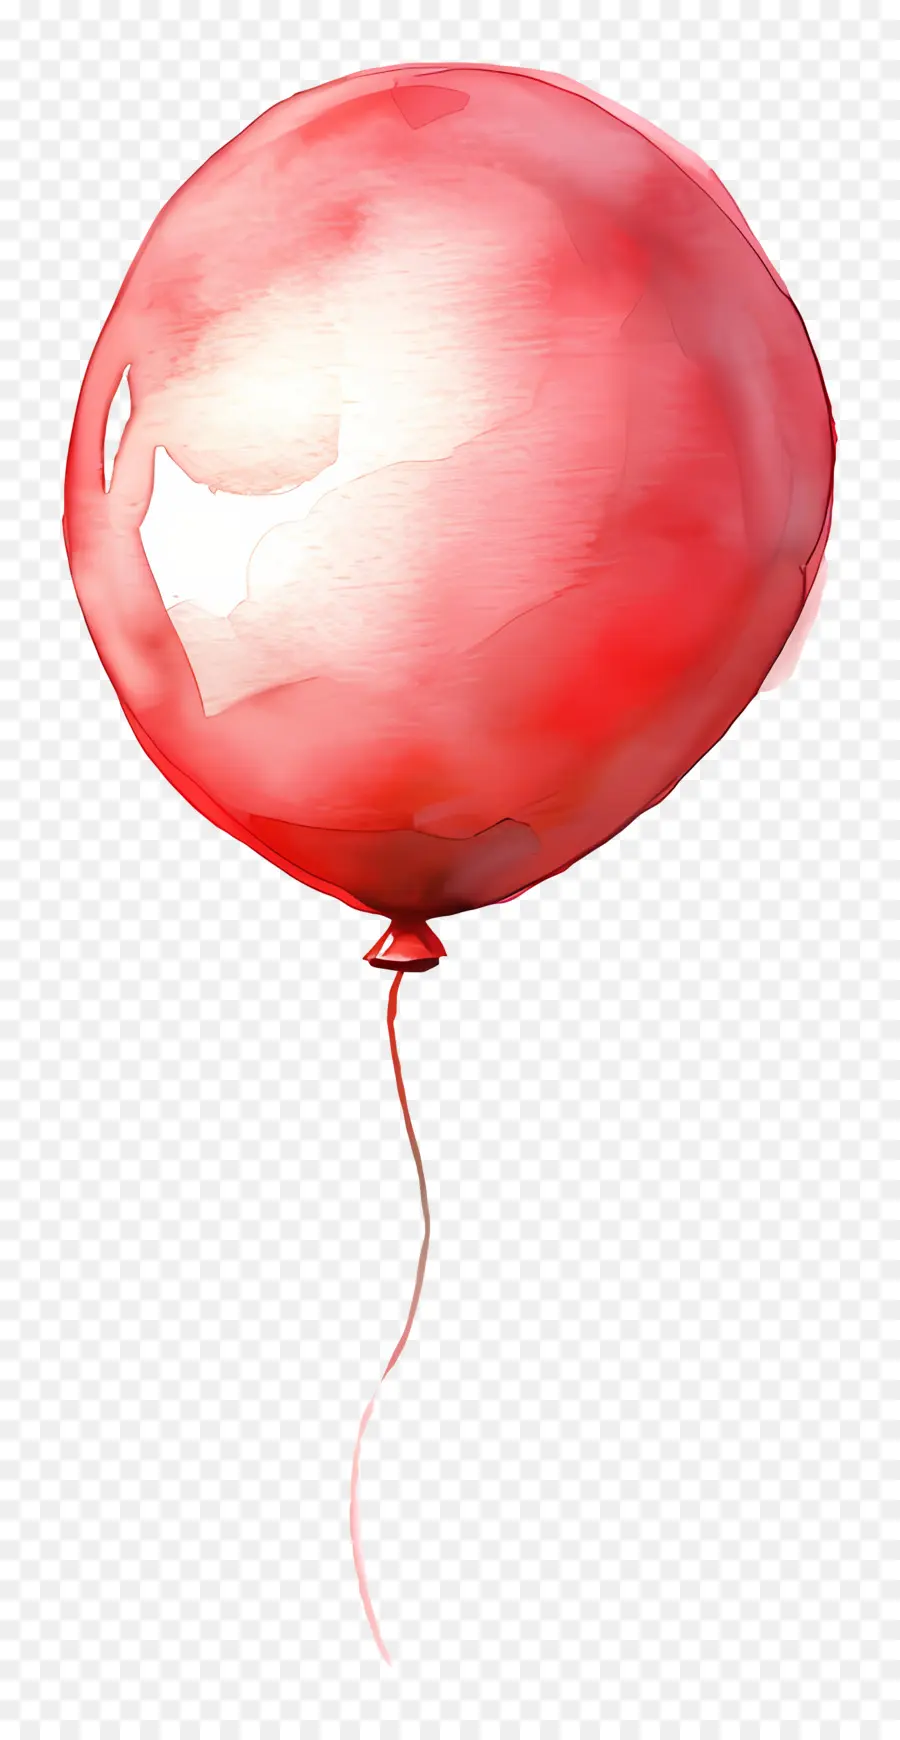 Solo Globo，Red Balloon PNG